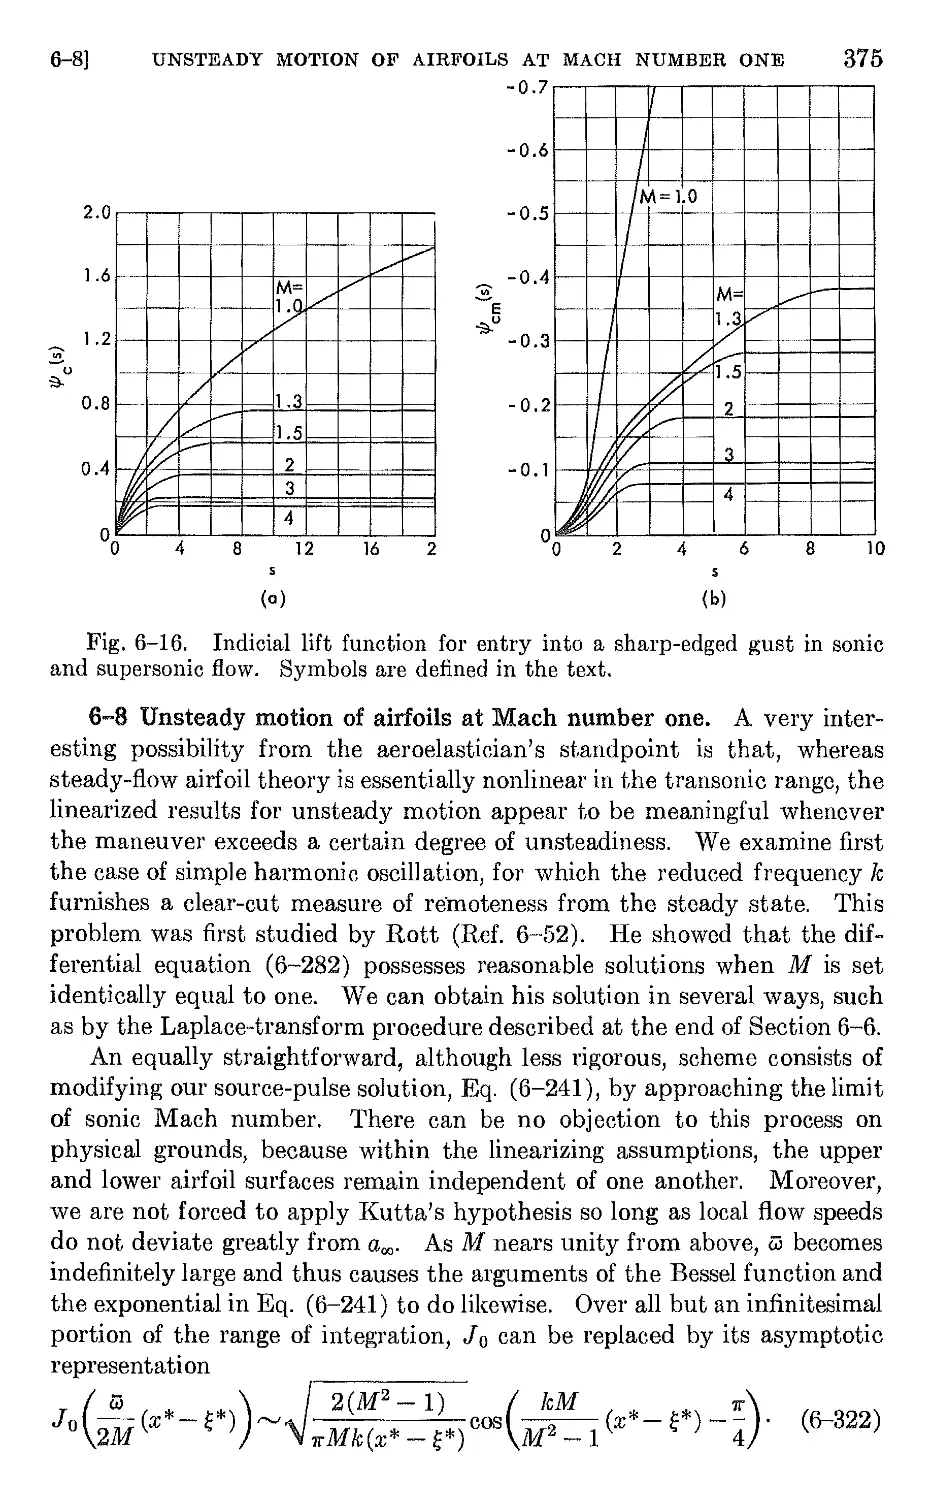 6.8 Unsteady motion of airfoils at Mach number one